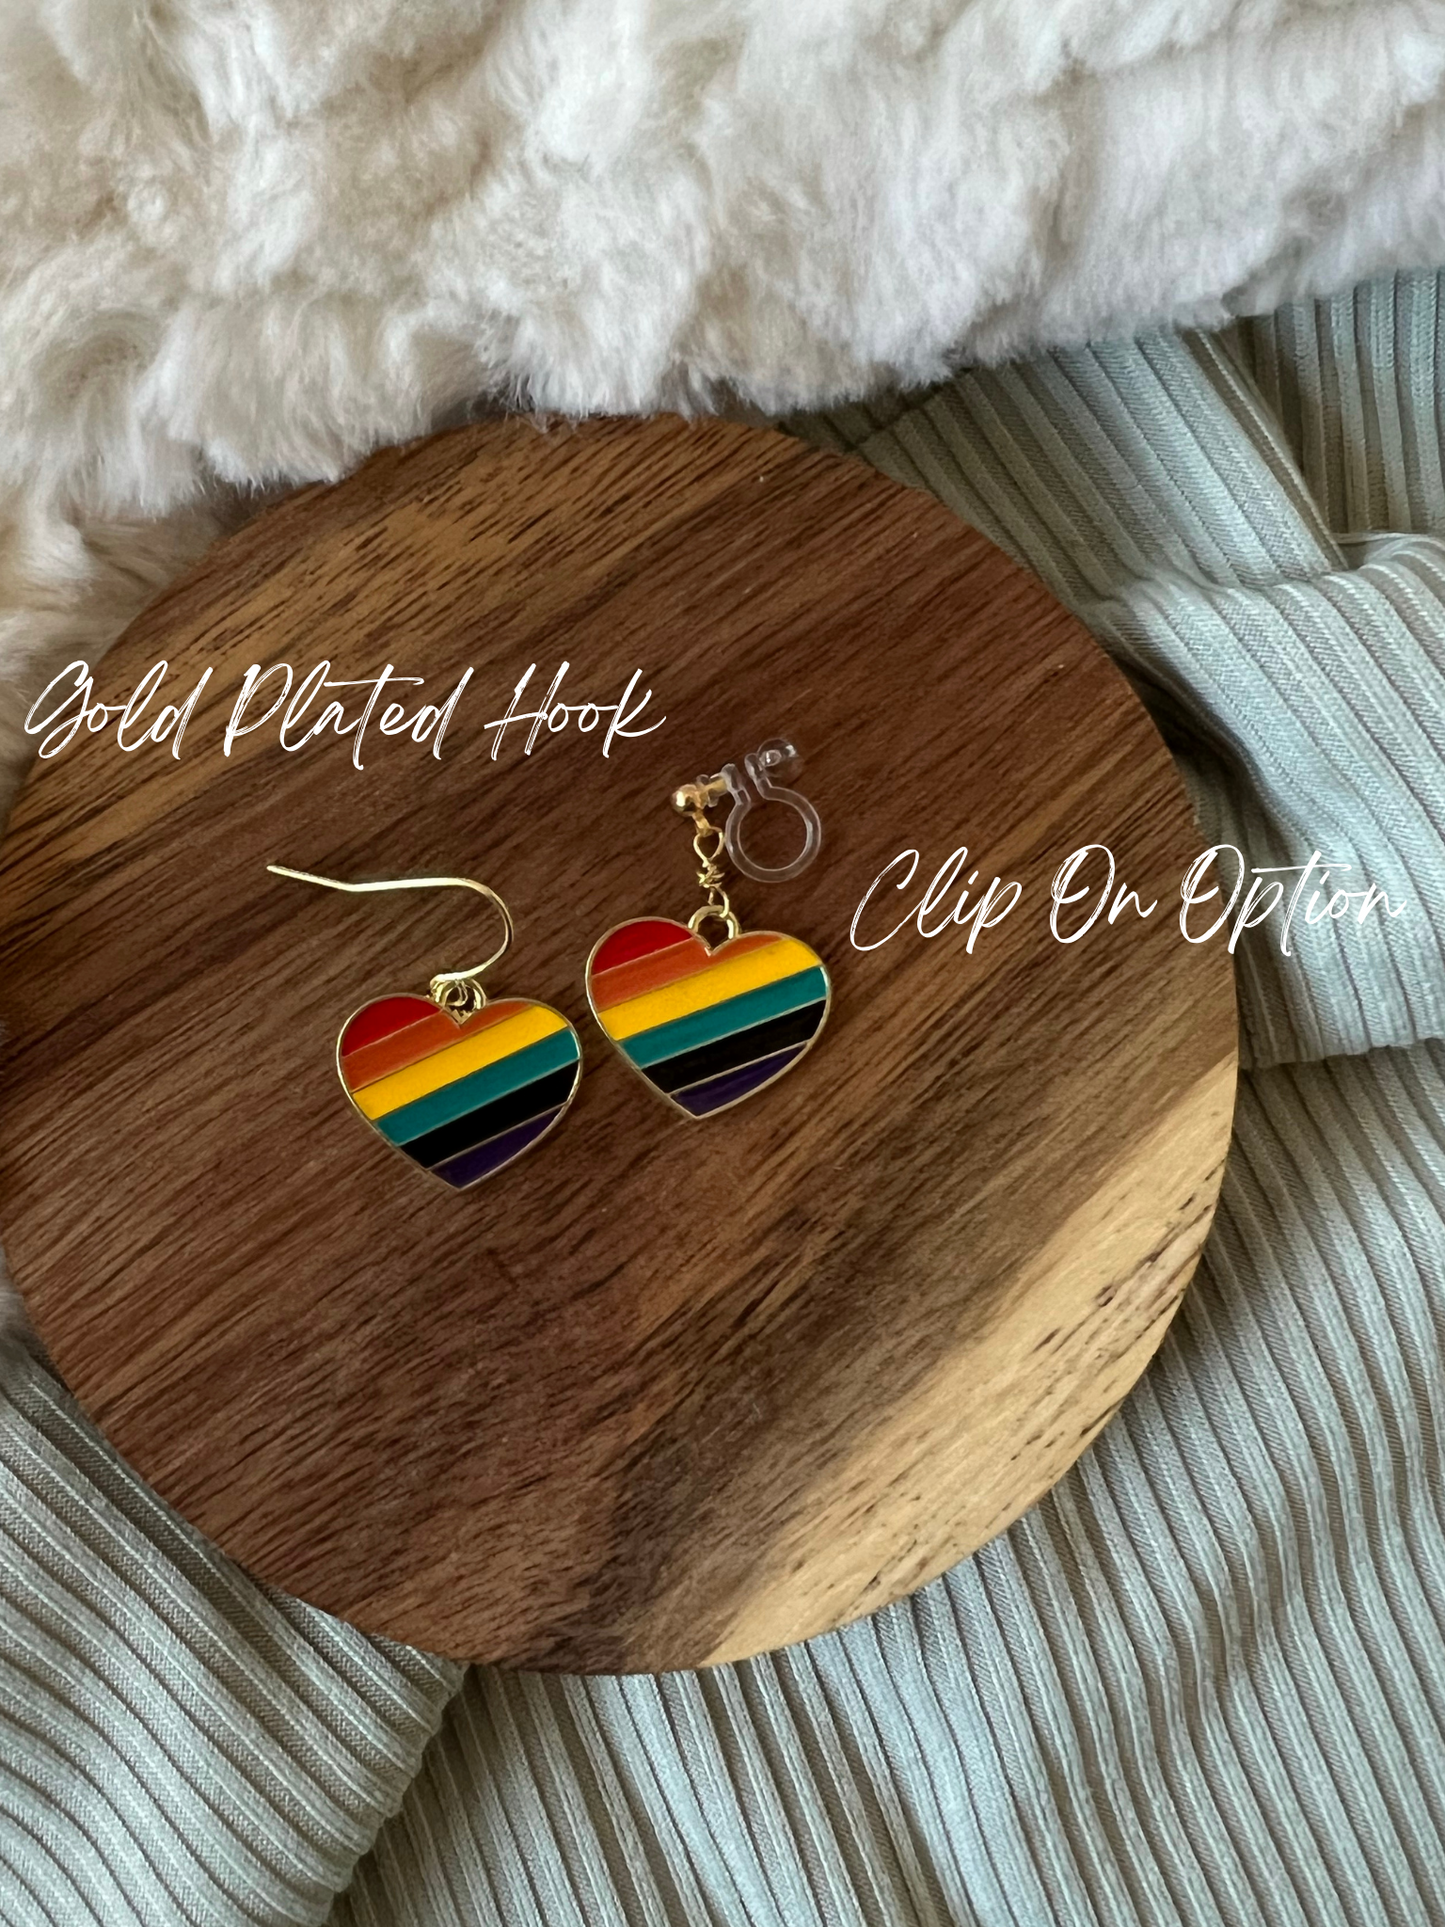 Star Power Rainbow Necklace and Earrings